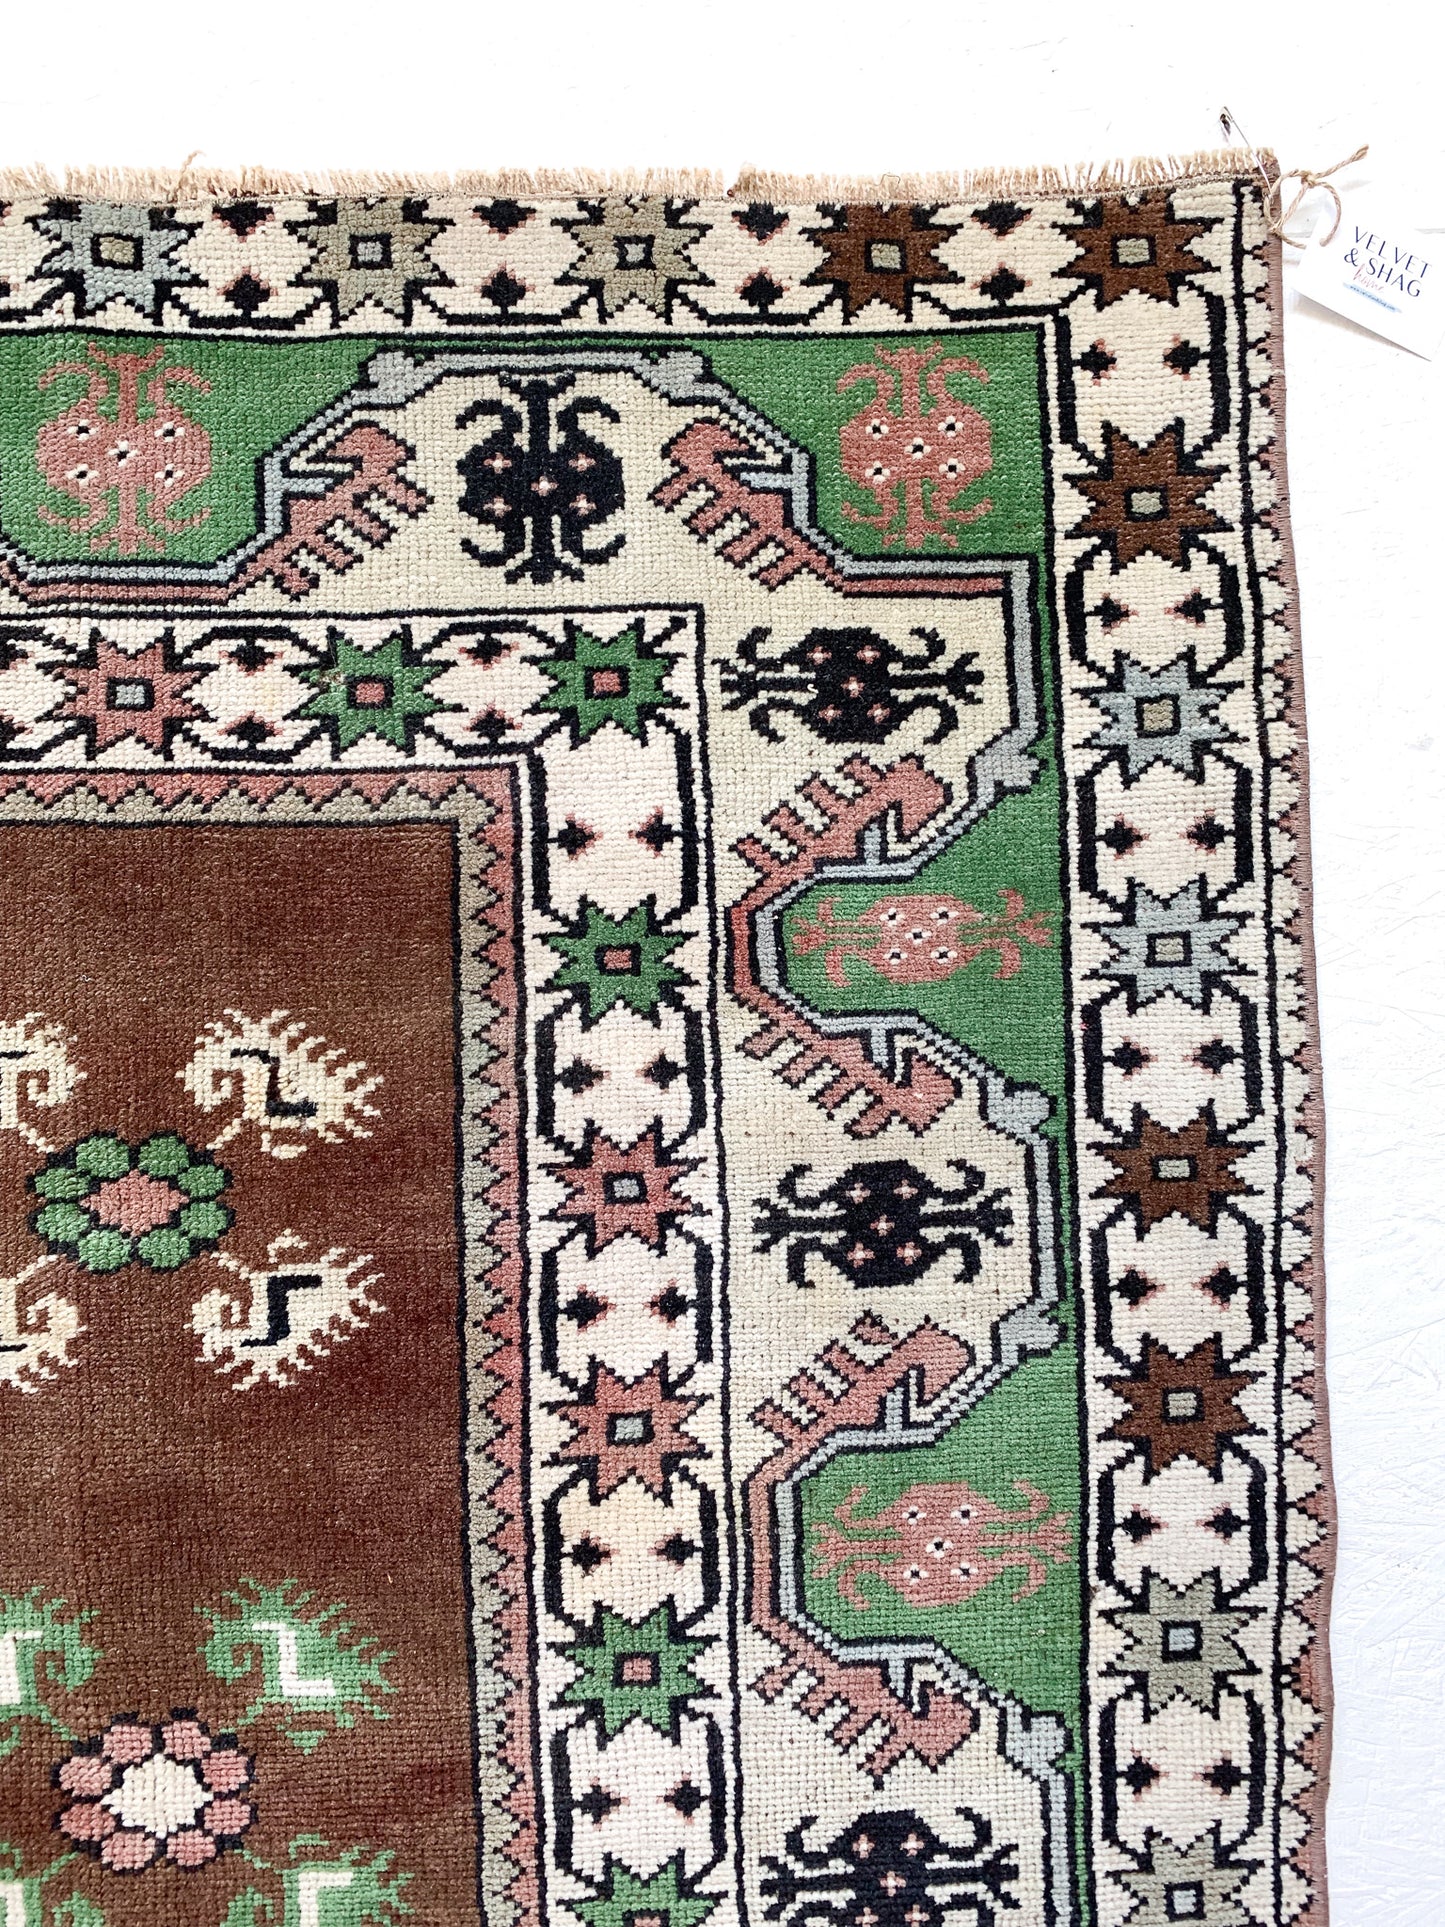 Reserved for Abby - No. A1057 - 3.5' x 6.1' Vintage Turkish Area Rug